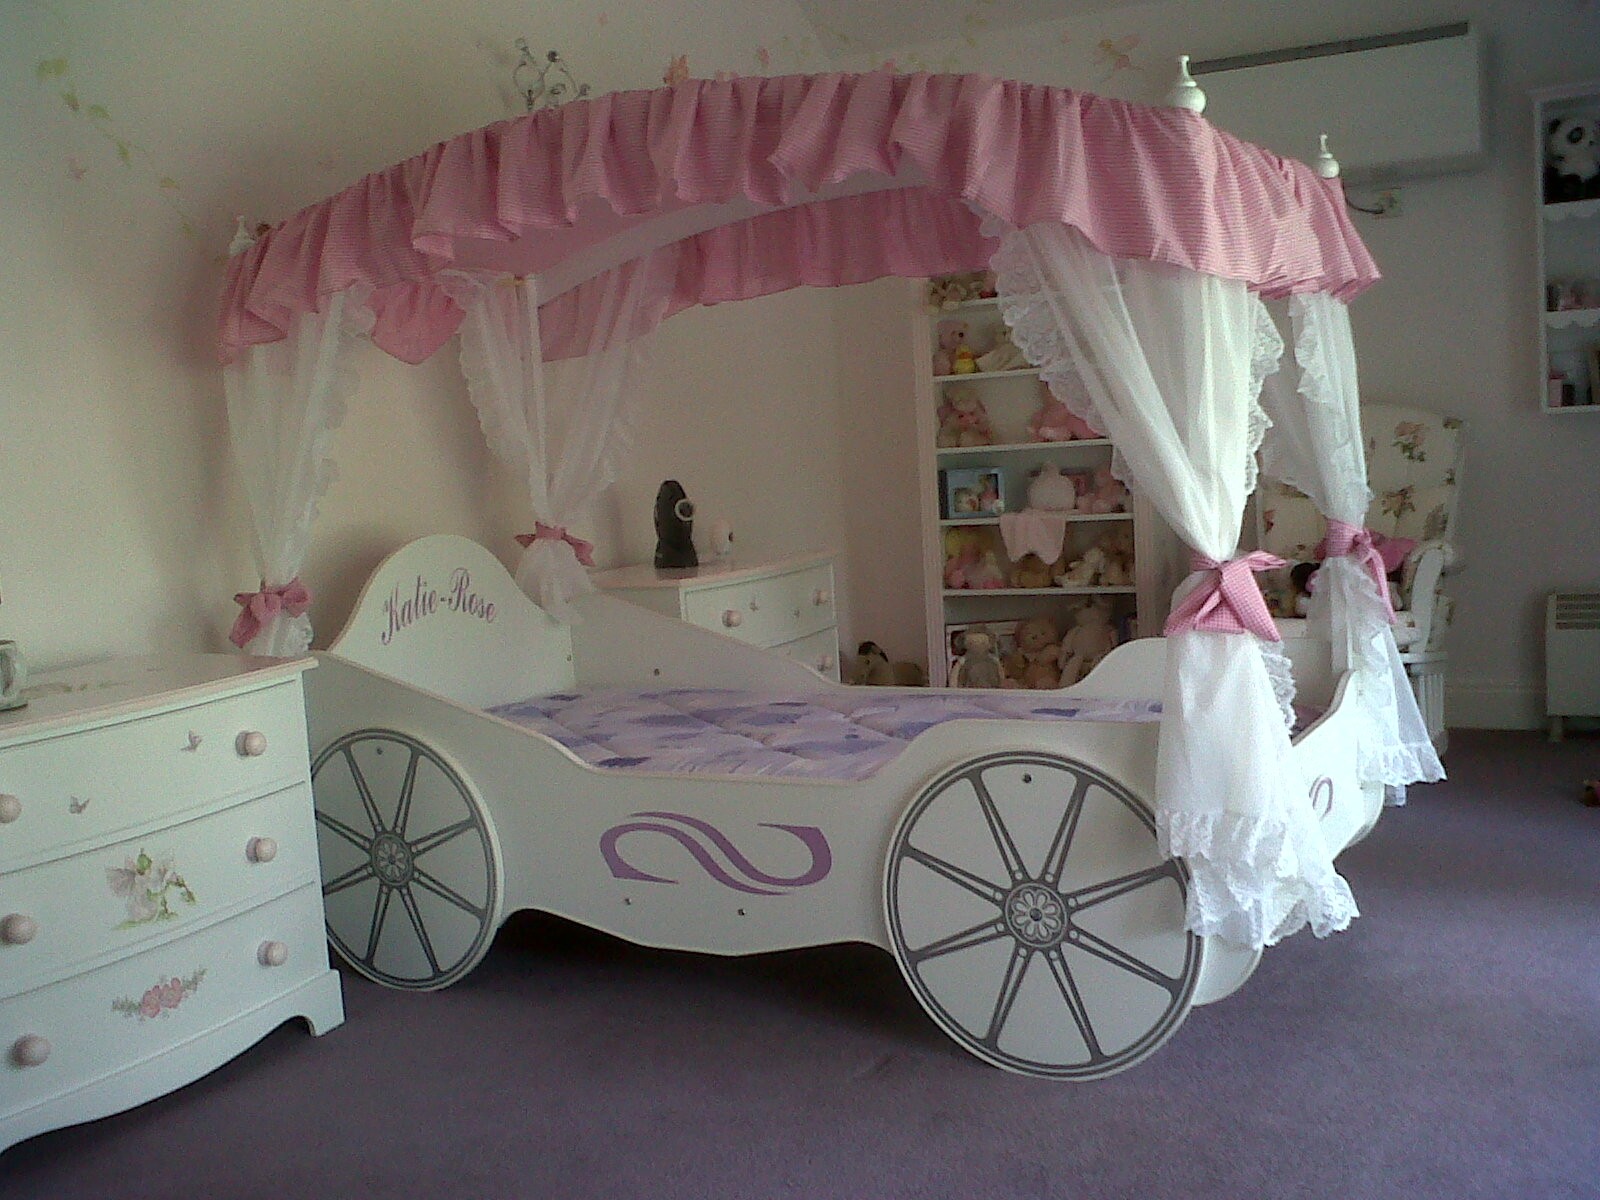 Bedroom funny princess carriage bed design 1